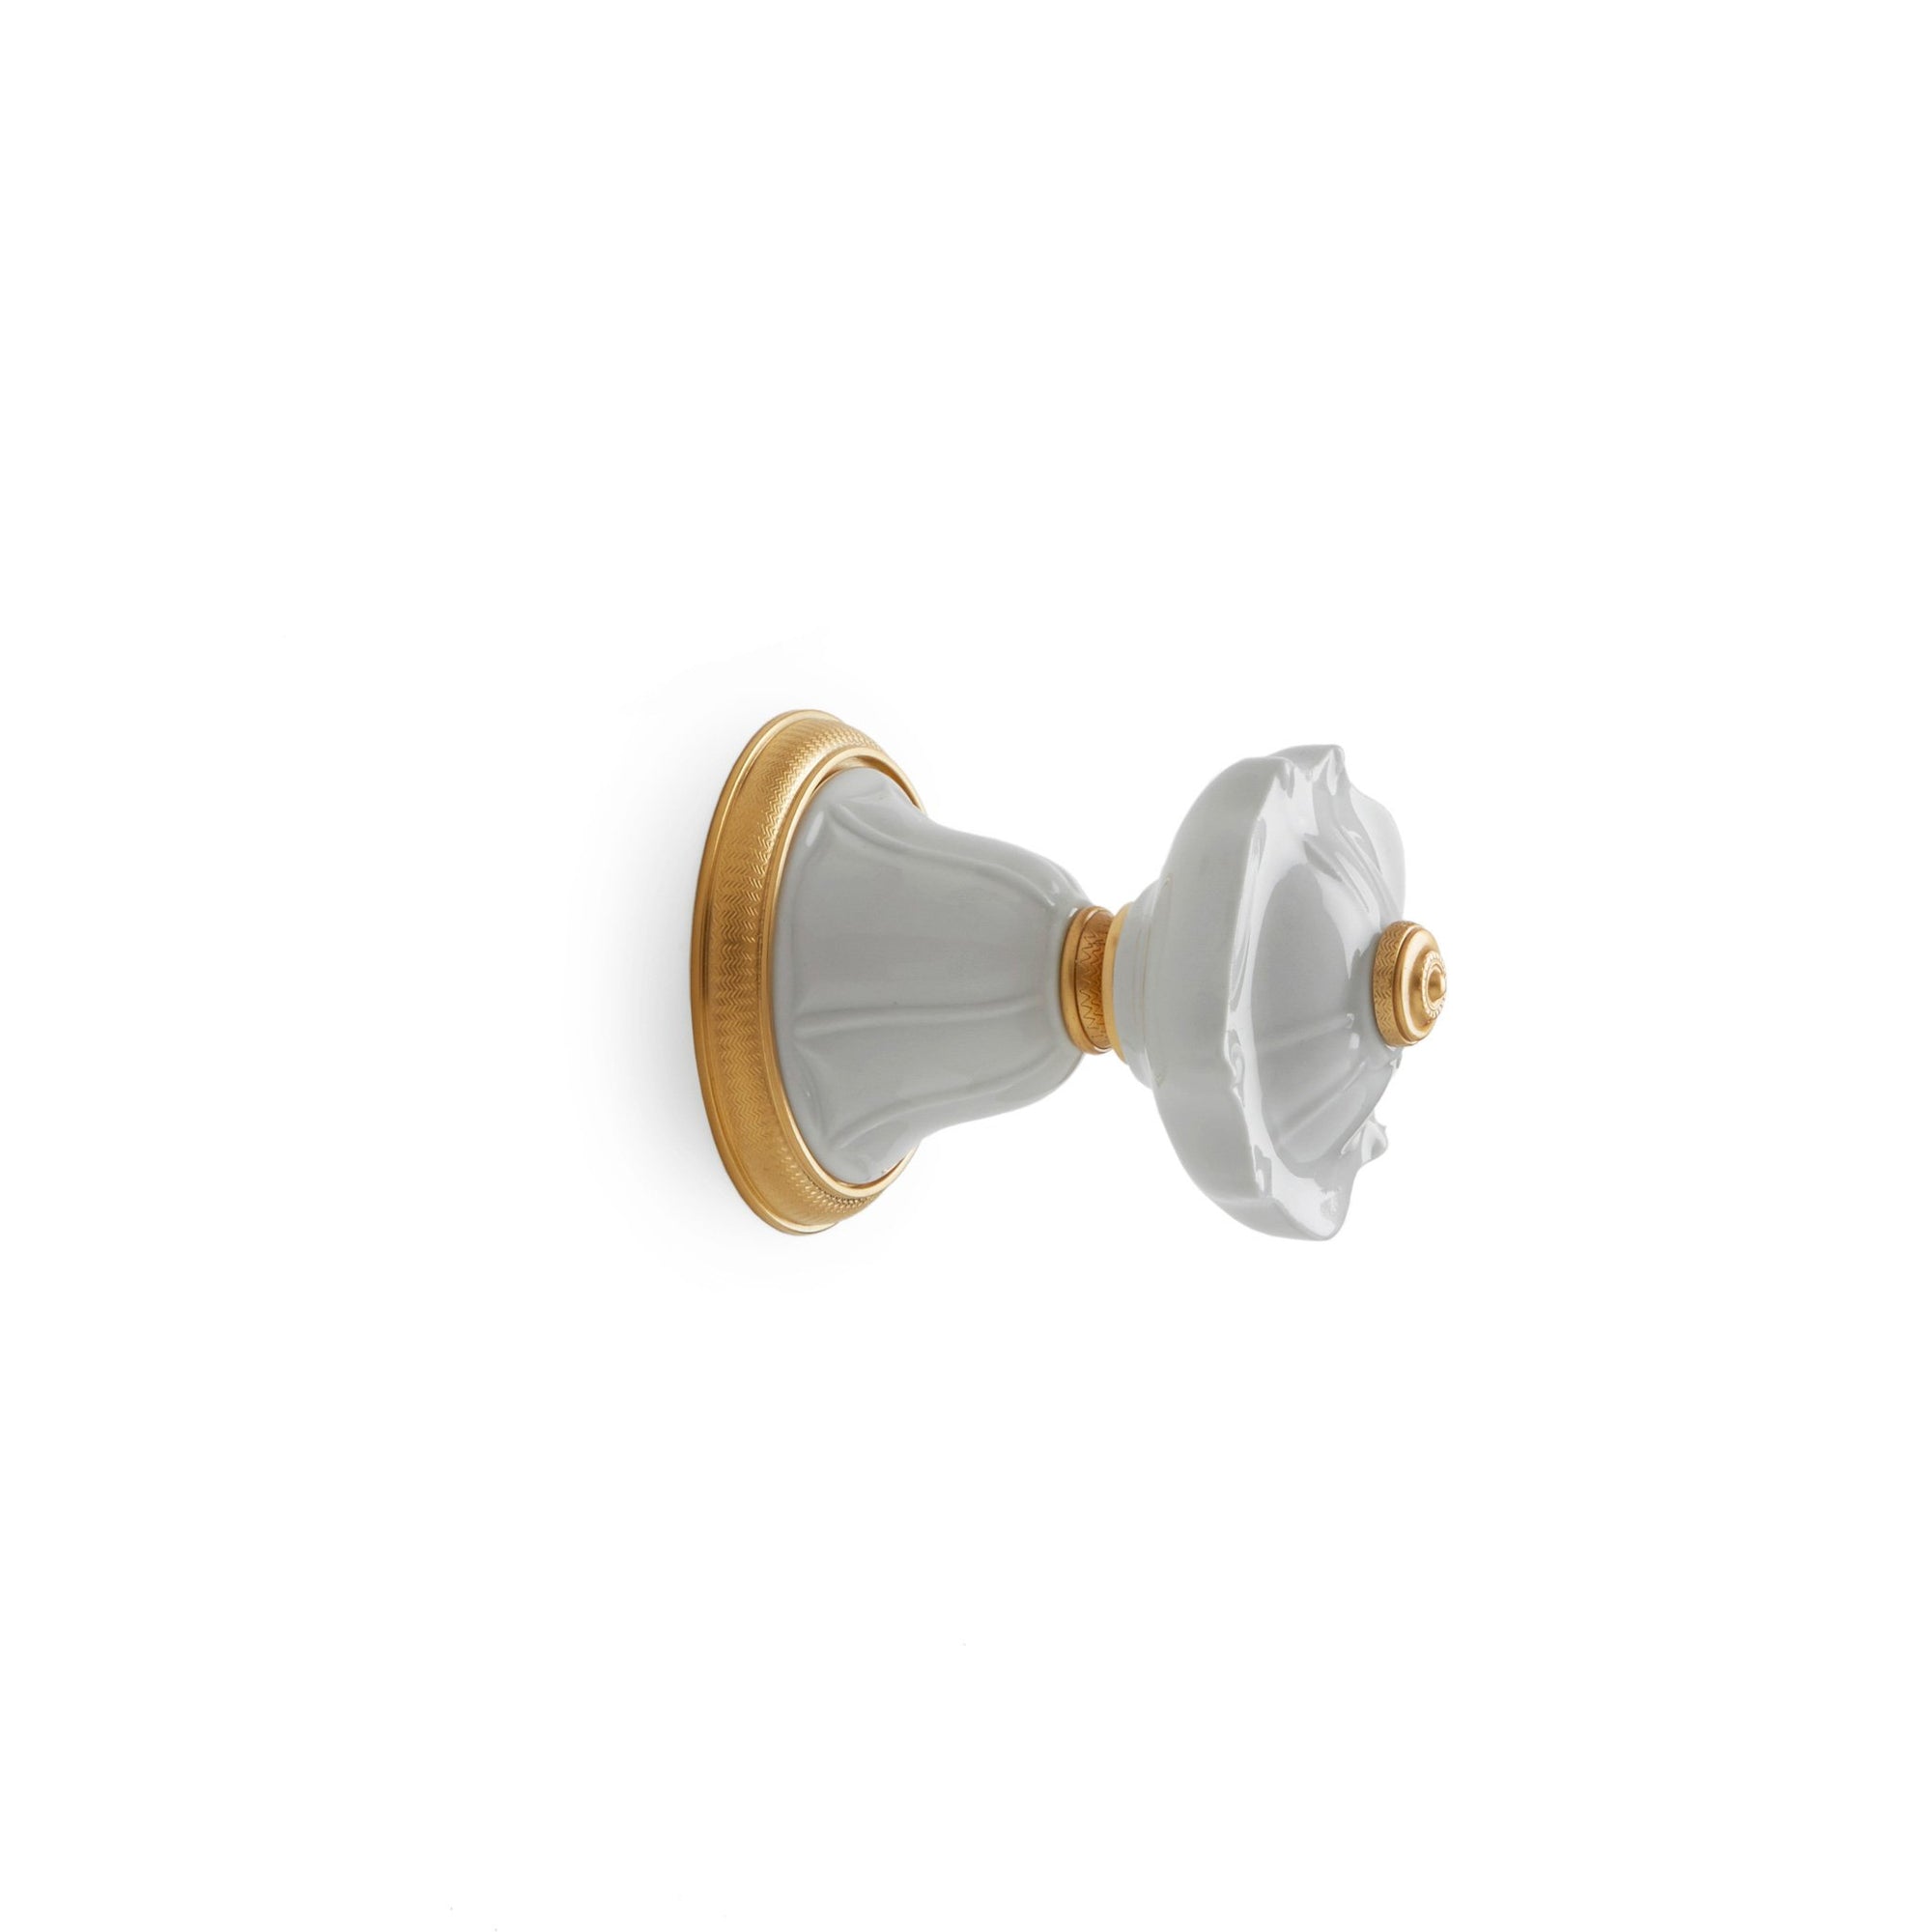 1097KB-ESC-03WH-GP Sherle Wagner International Scalloped Ceramic Knob Volume Control and Diverter Trim in Gold Plate metal finish with White Glaze inserts